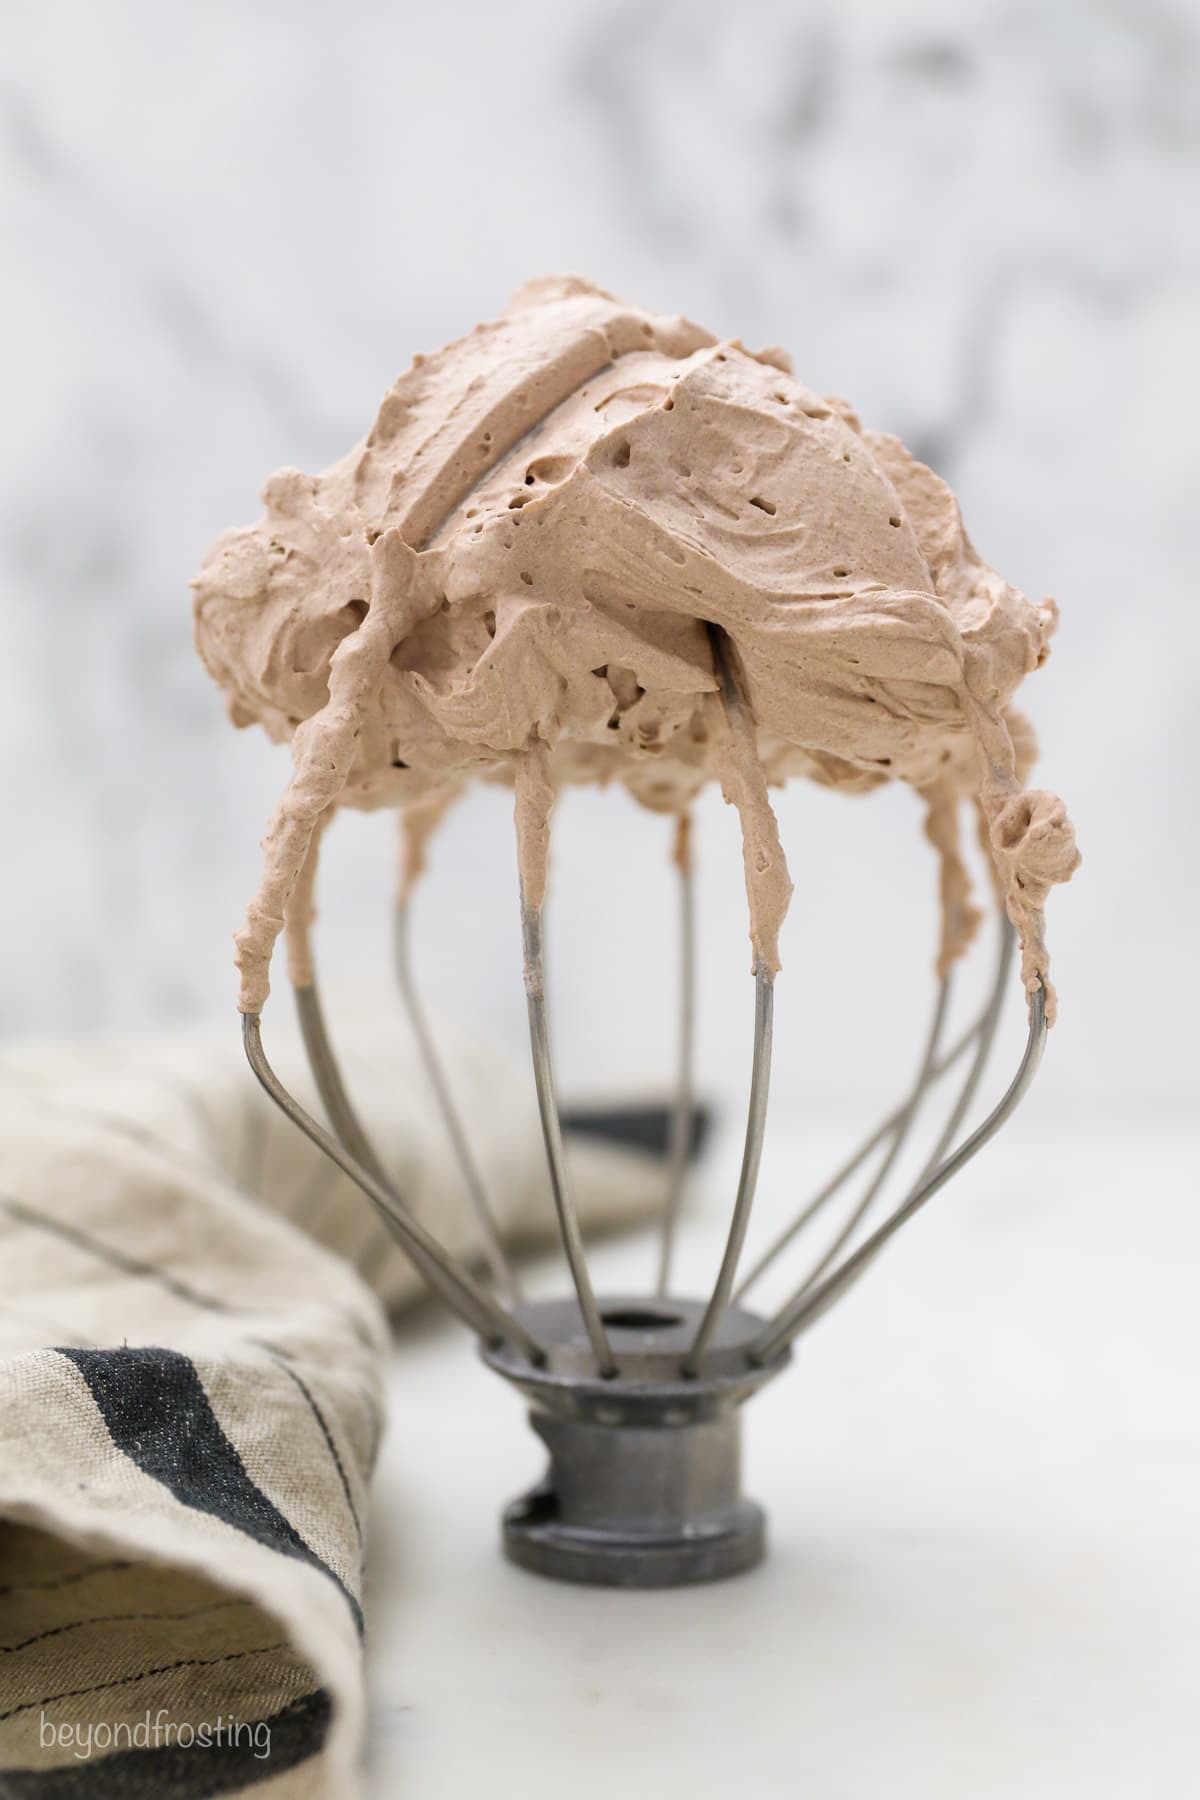 A wire whisk attachment with chocolate whipped cream on top